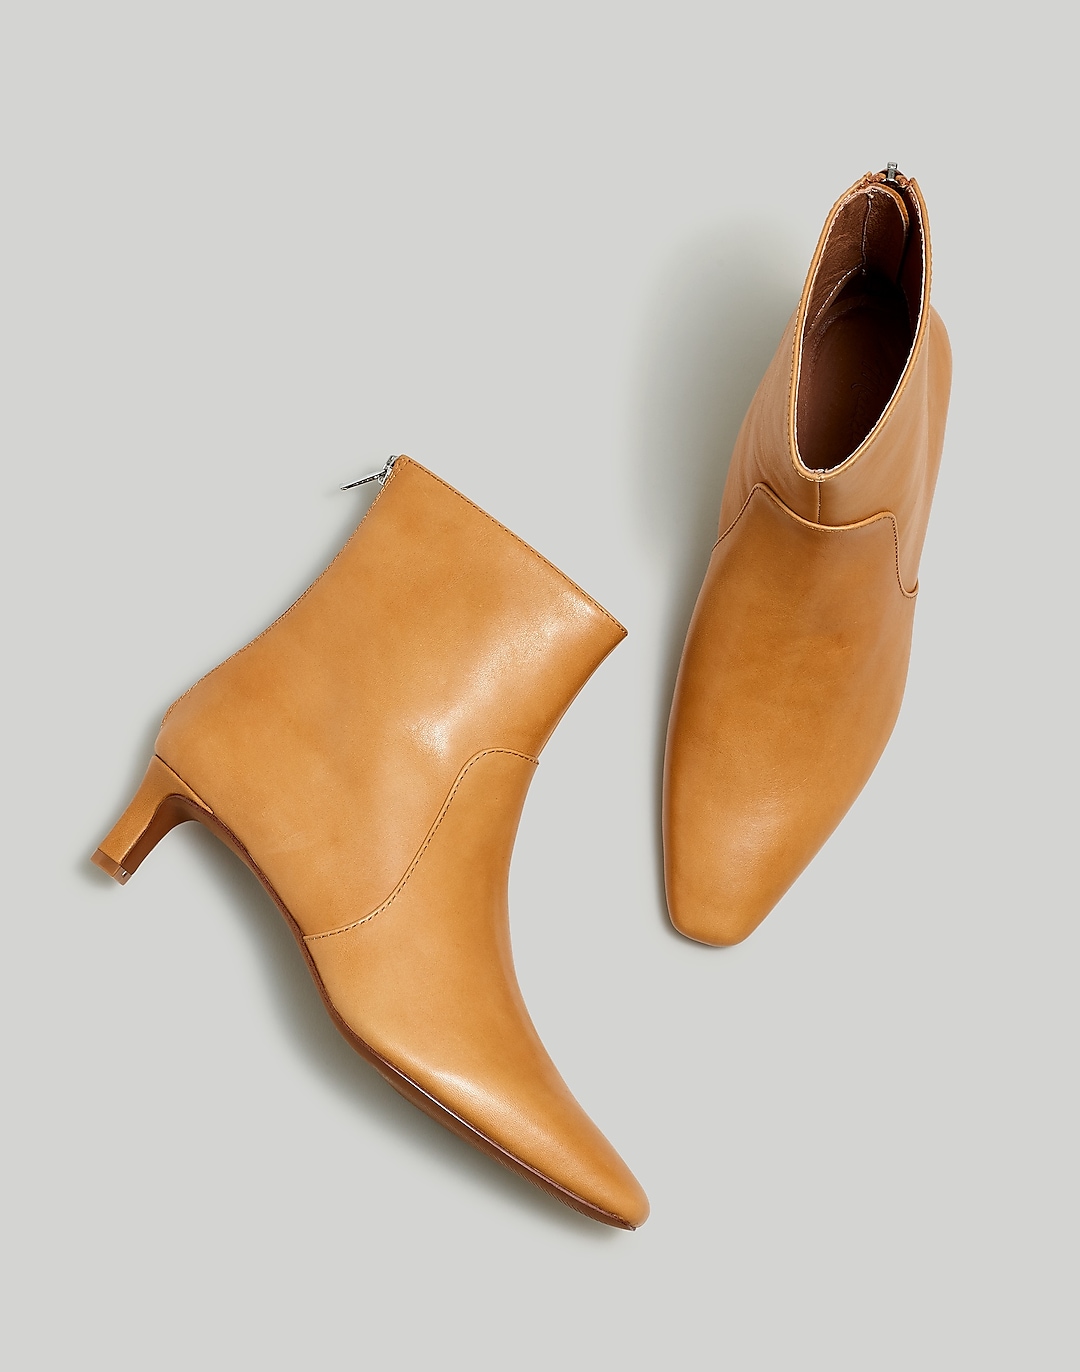 The Dimes Kitten-Heel Boot in Crinkle Leather | Madewell